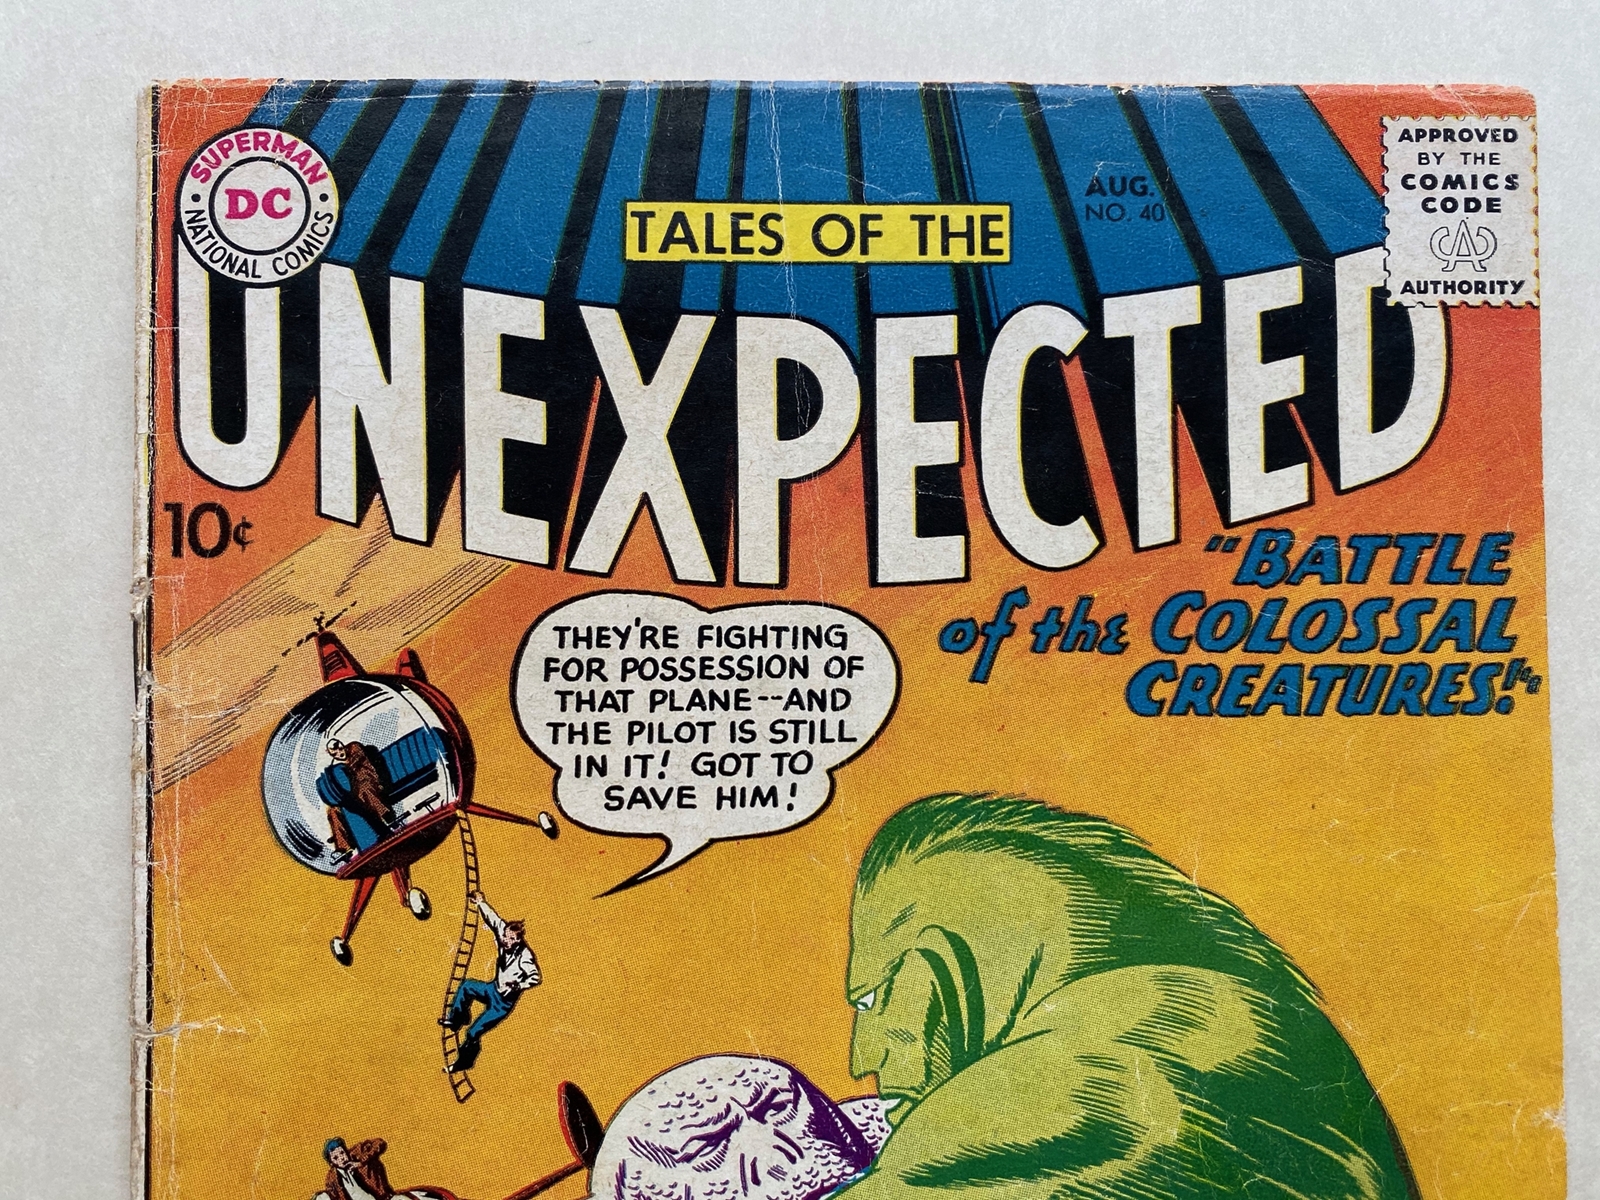 TALES OF THE UNEXPECTED #40 - (1959 - DC - Cents Copy - GD/VG) - Space Ranger features begin - Bob - Image 2 of 7